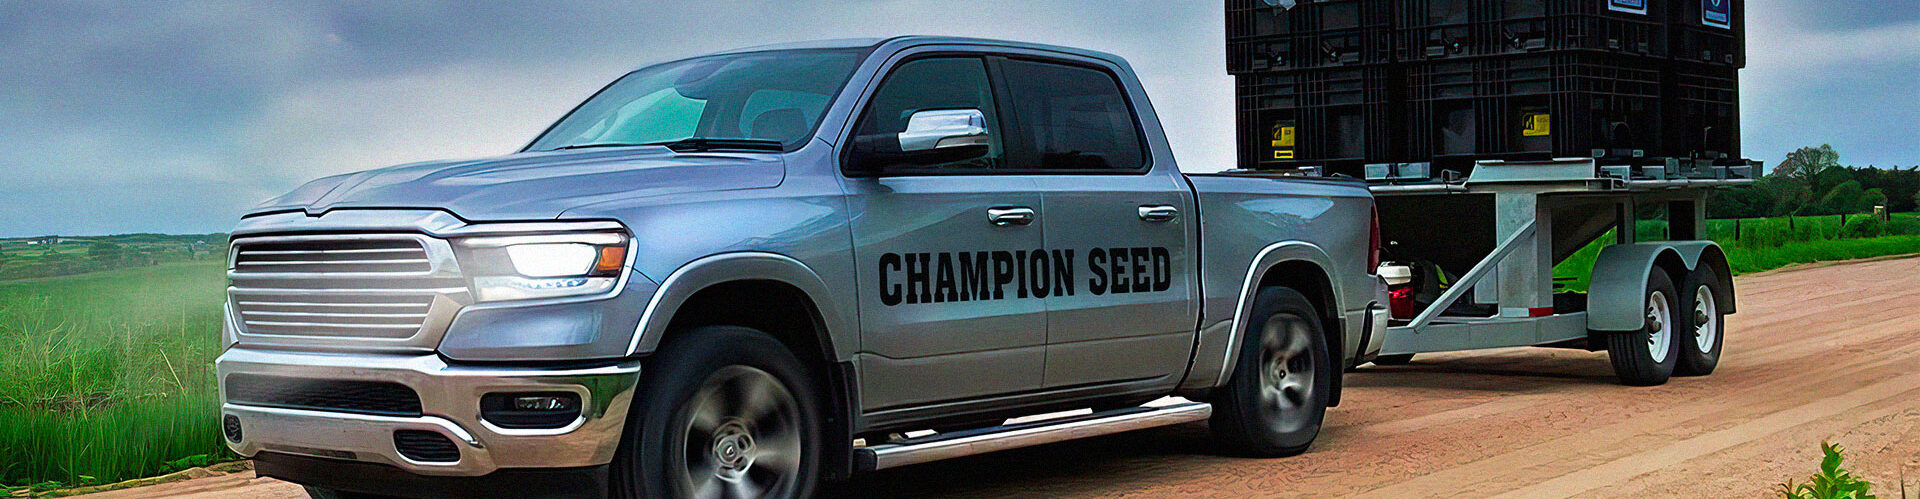 Truck with Champion Seed printed on the site, hauling a trailer that has two Champion Seed crates full of seed on top. The truck is driving down a dirt road with green grass and cloudly sky.